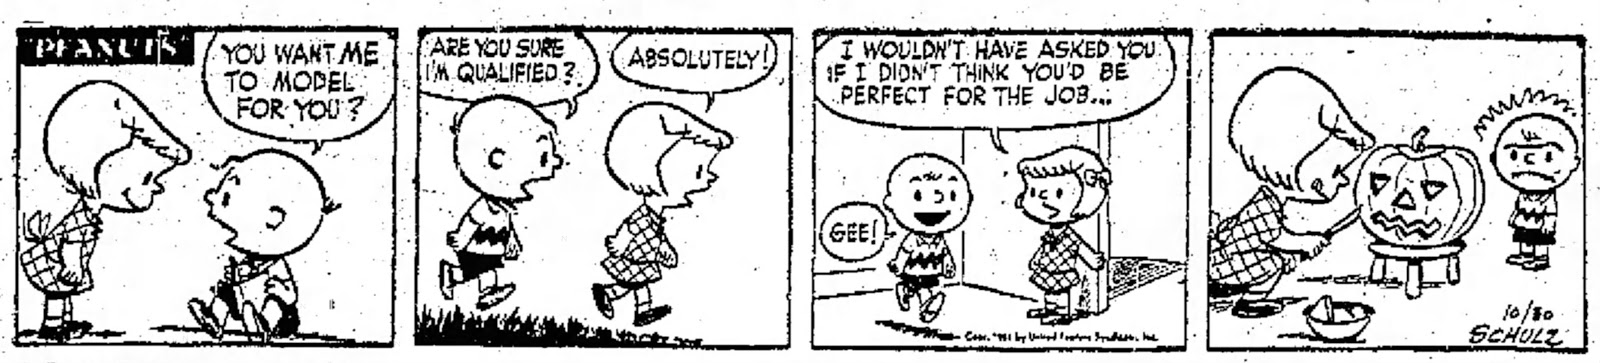 Image result for peanuts halloween strip 1951